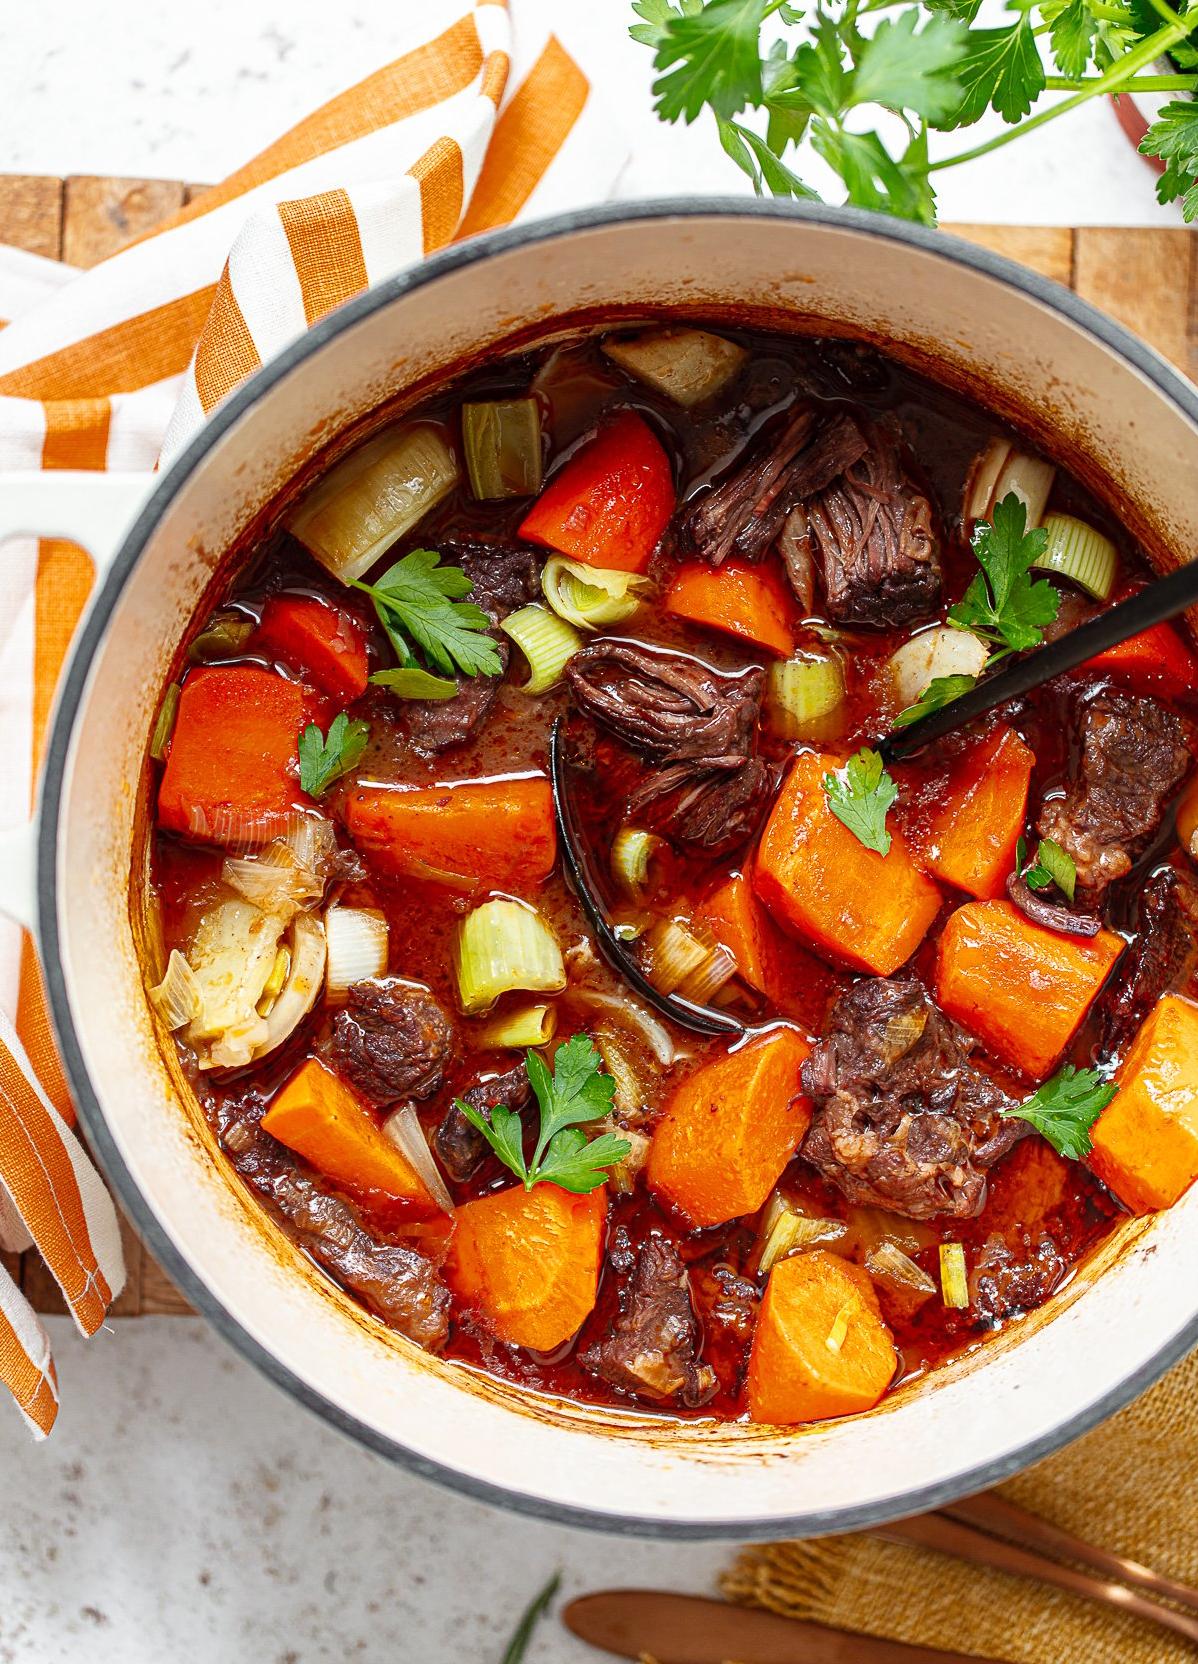 Beef Stew With Red Wine and Vegetables